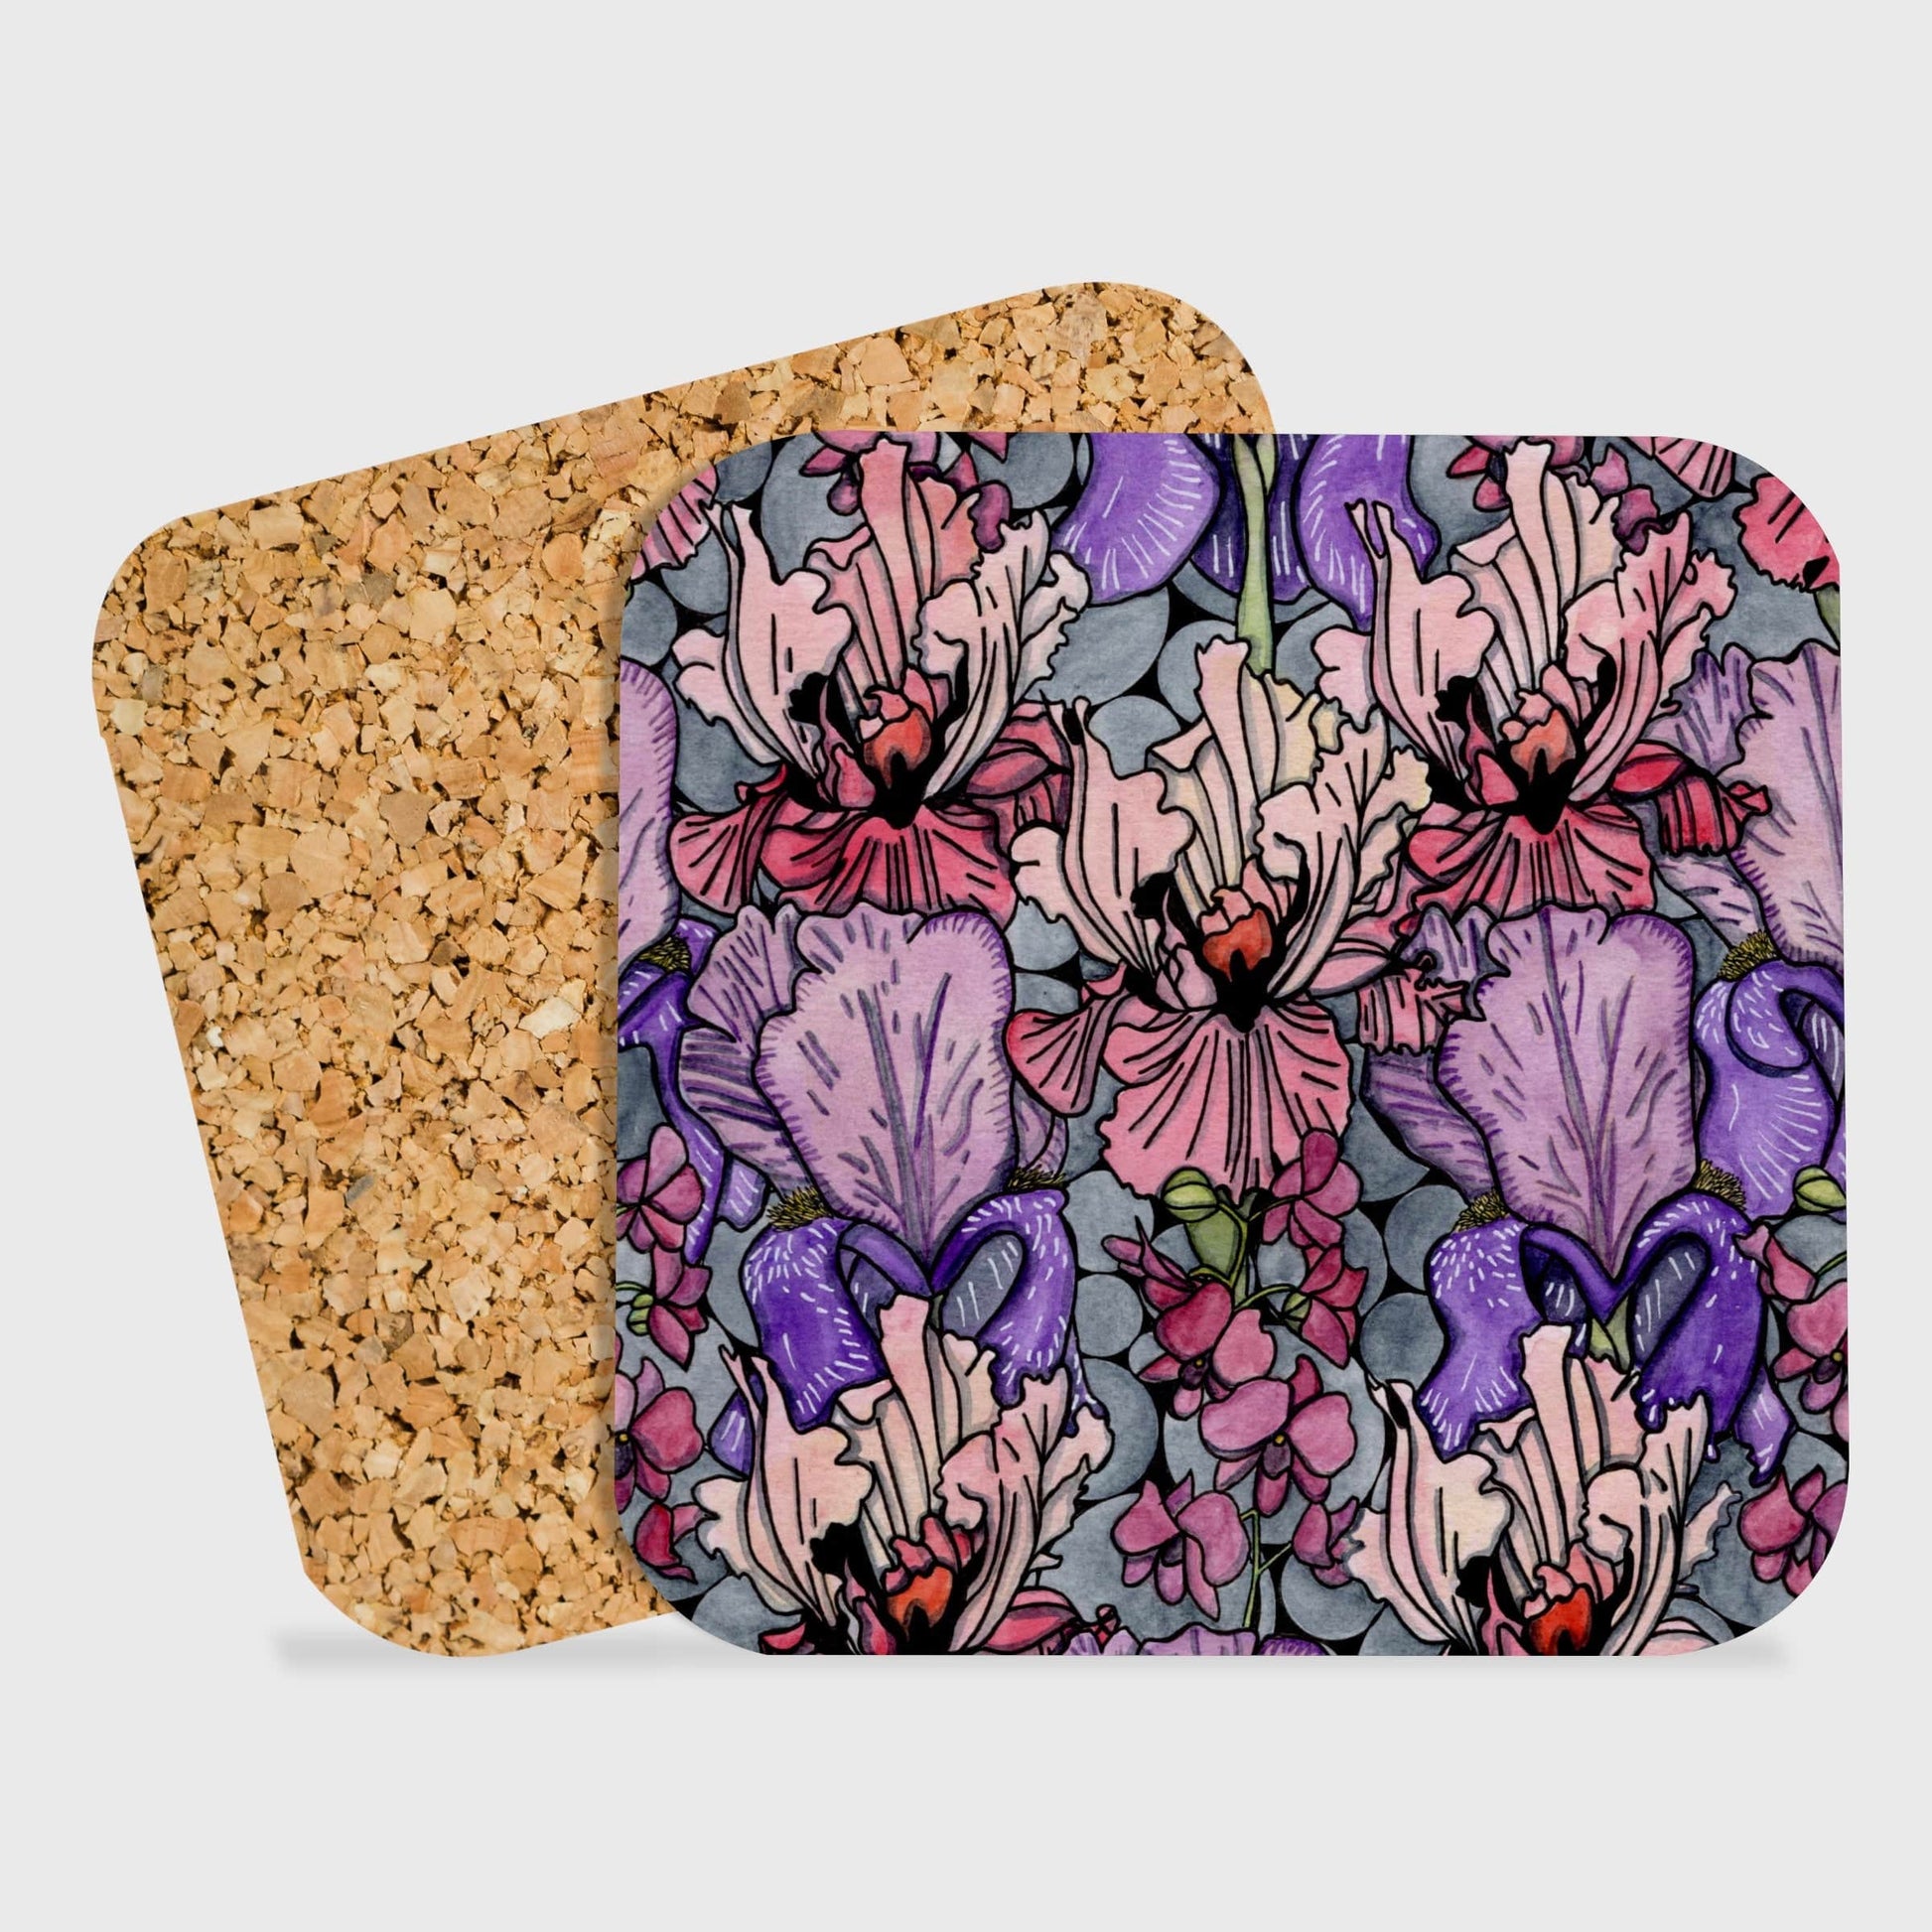 PinkPolish Design Coasters "Floral Repetition" Drink Coaster